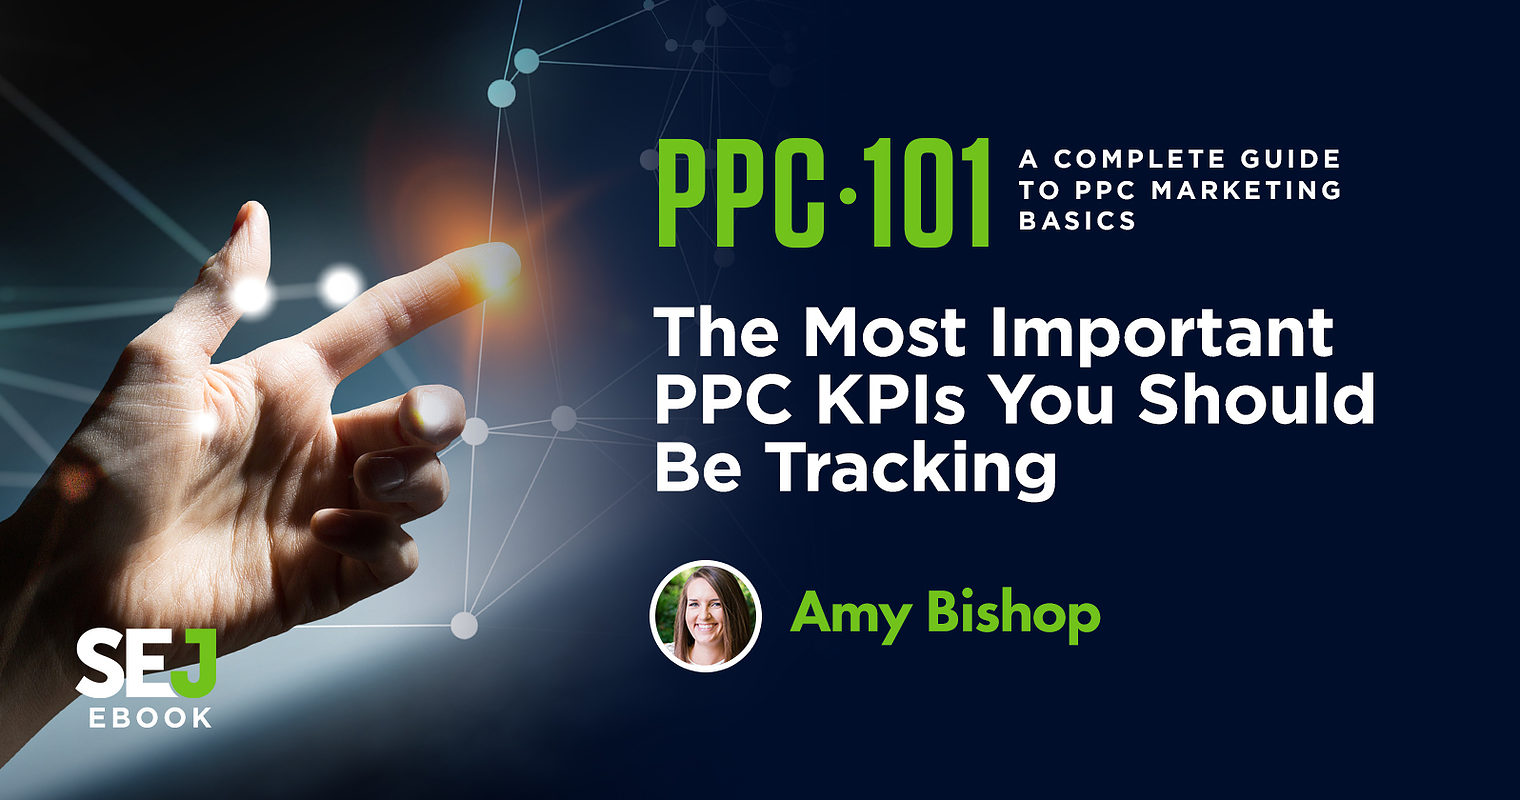 The 6 Most Important PPC KPIs You Should Be Tracking